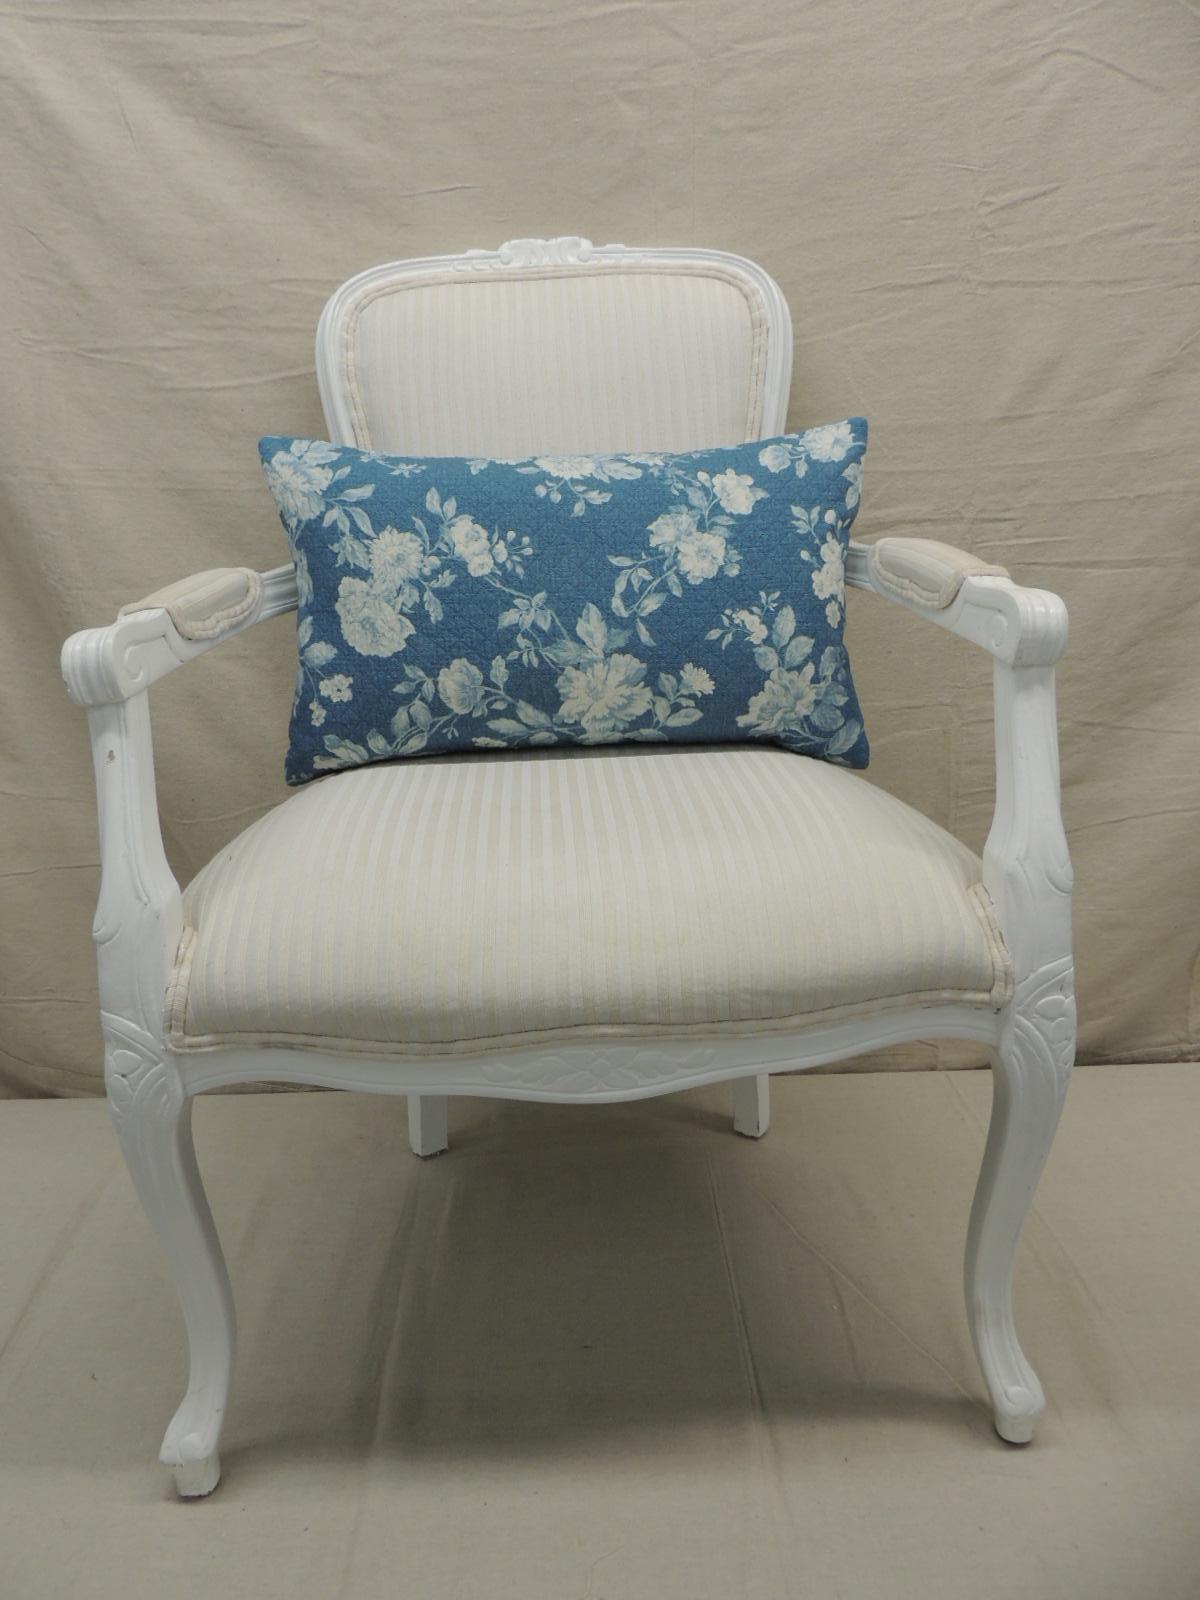 Contemporary Pair of Modern Blue and White Quilted Cotton Floral Decorative Lumbar Pillows